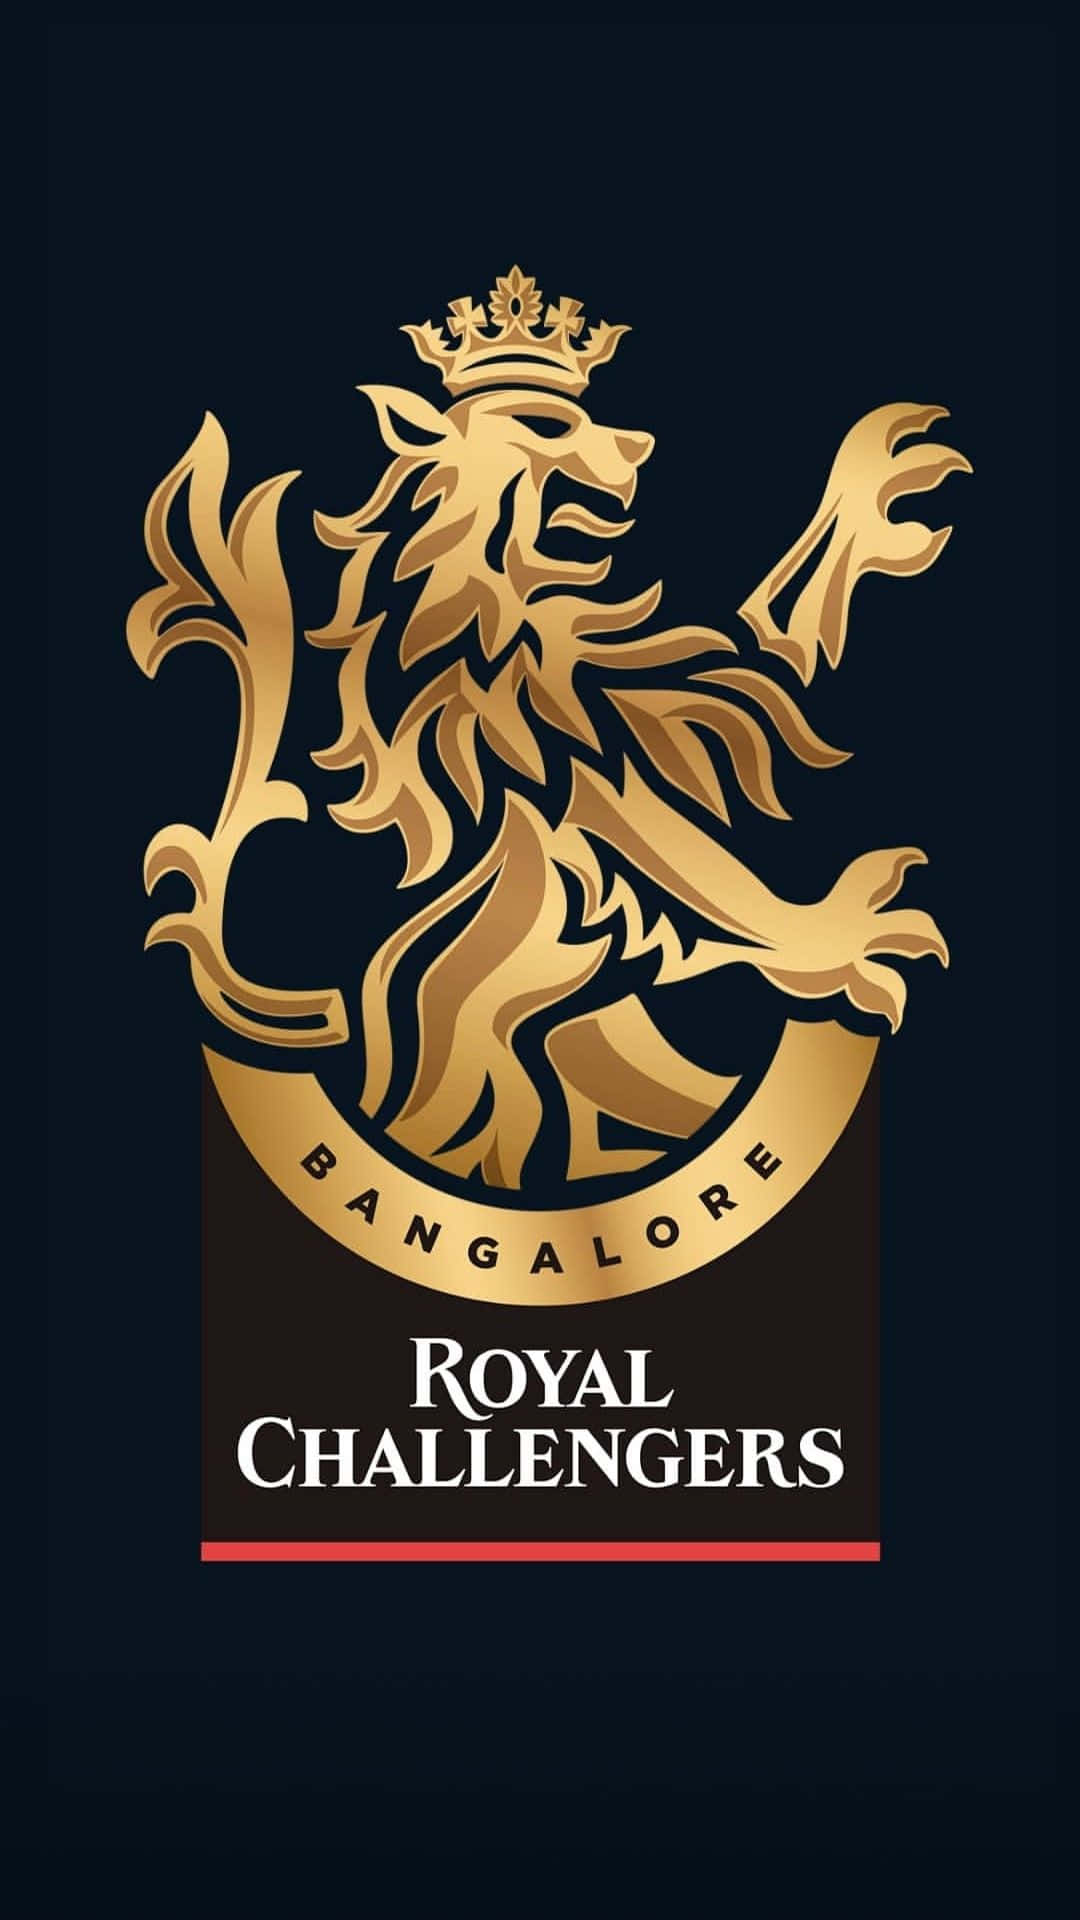 Royal Challengers Logo On A Black Background